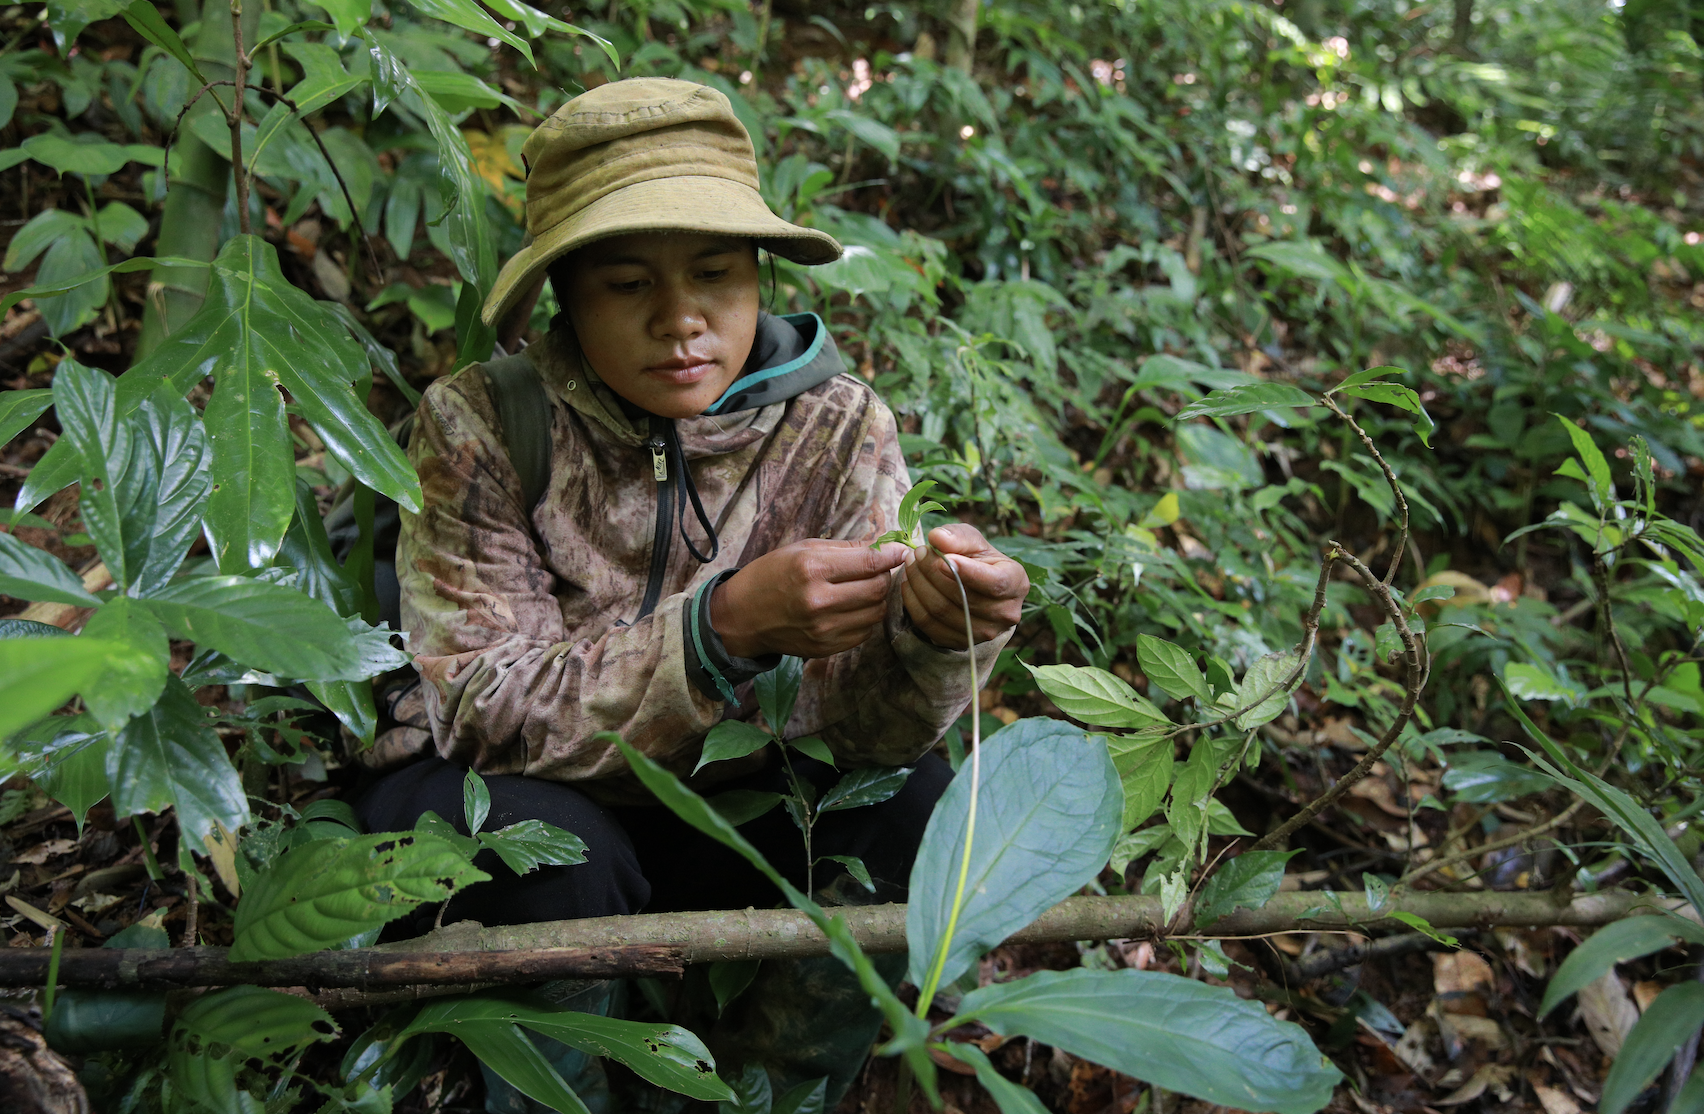 Woman crouches amid underbrush in Vietnamese forest